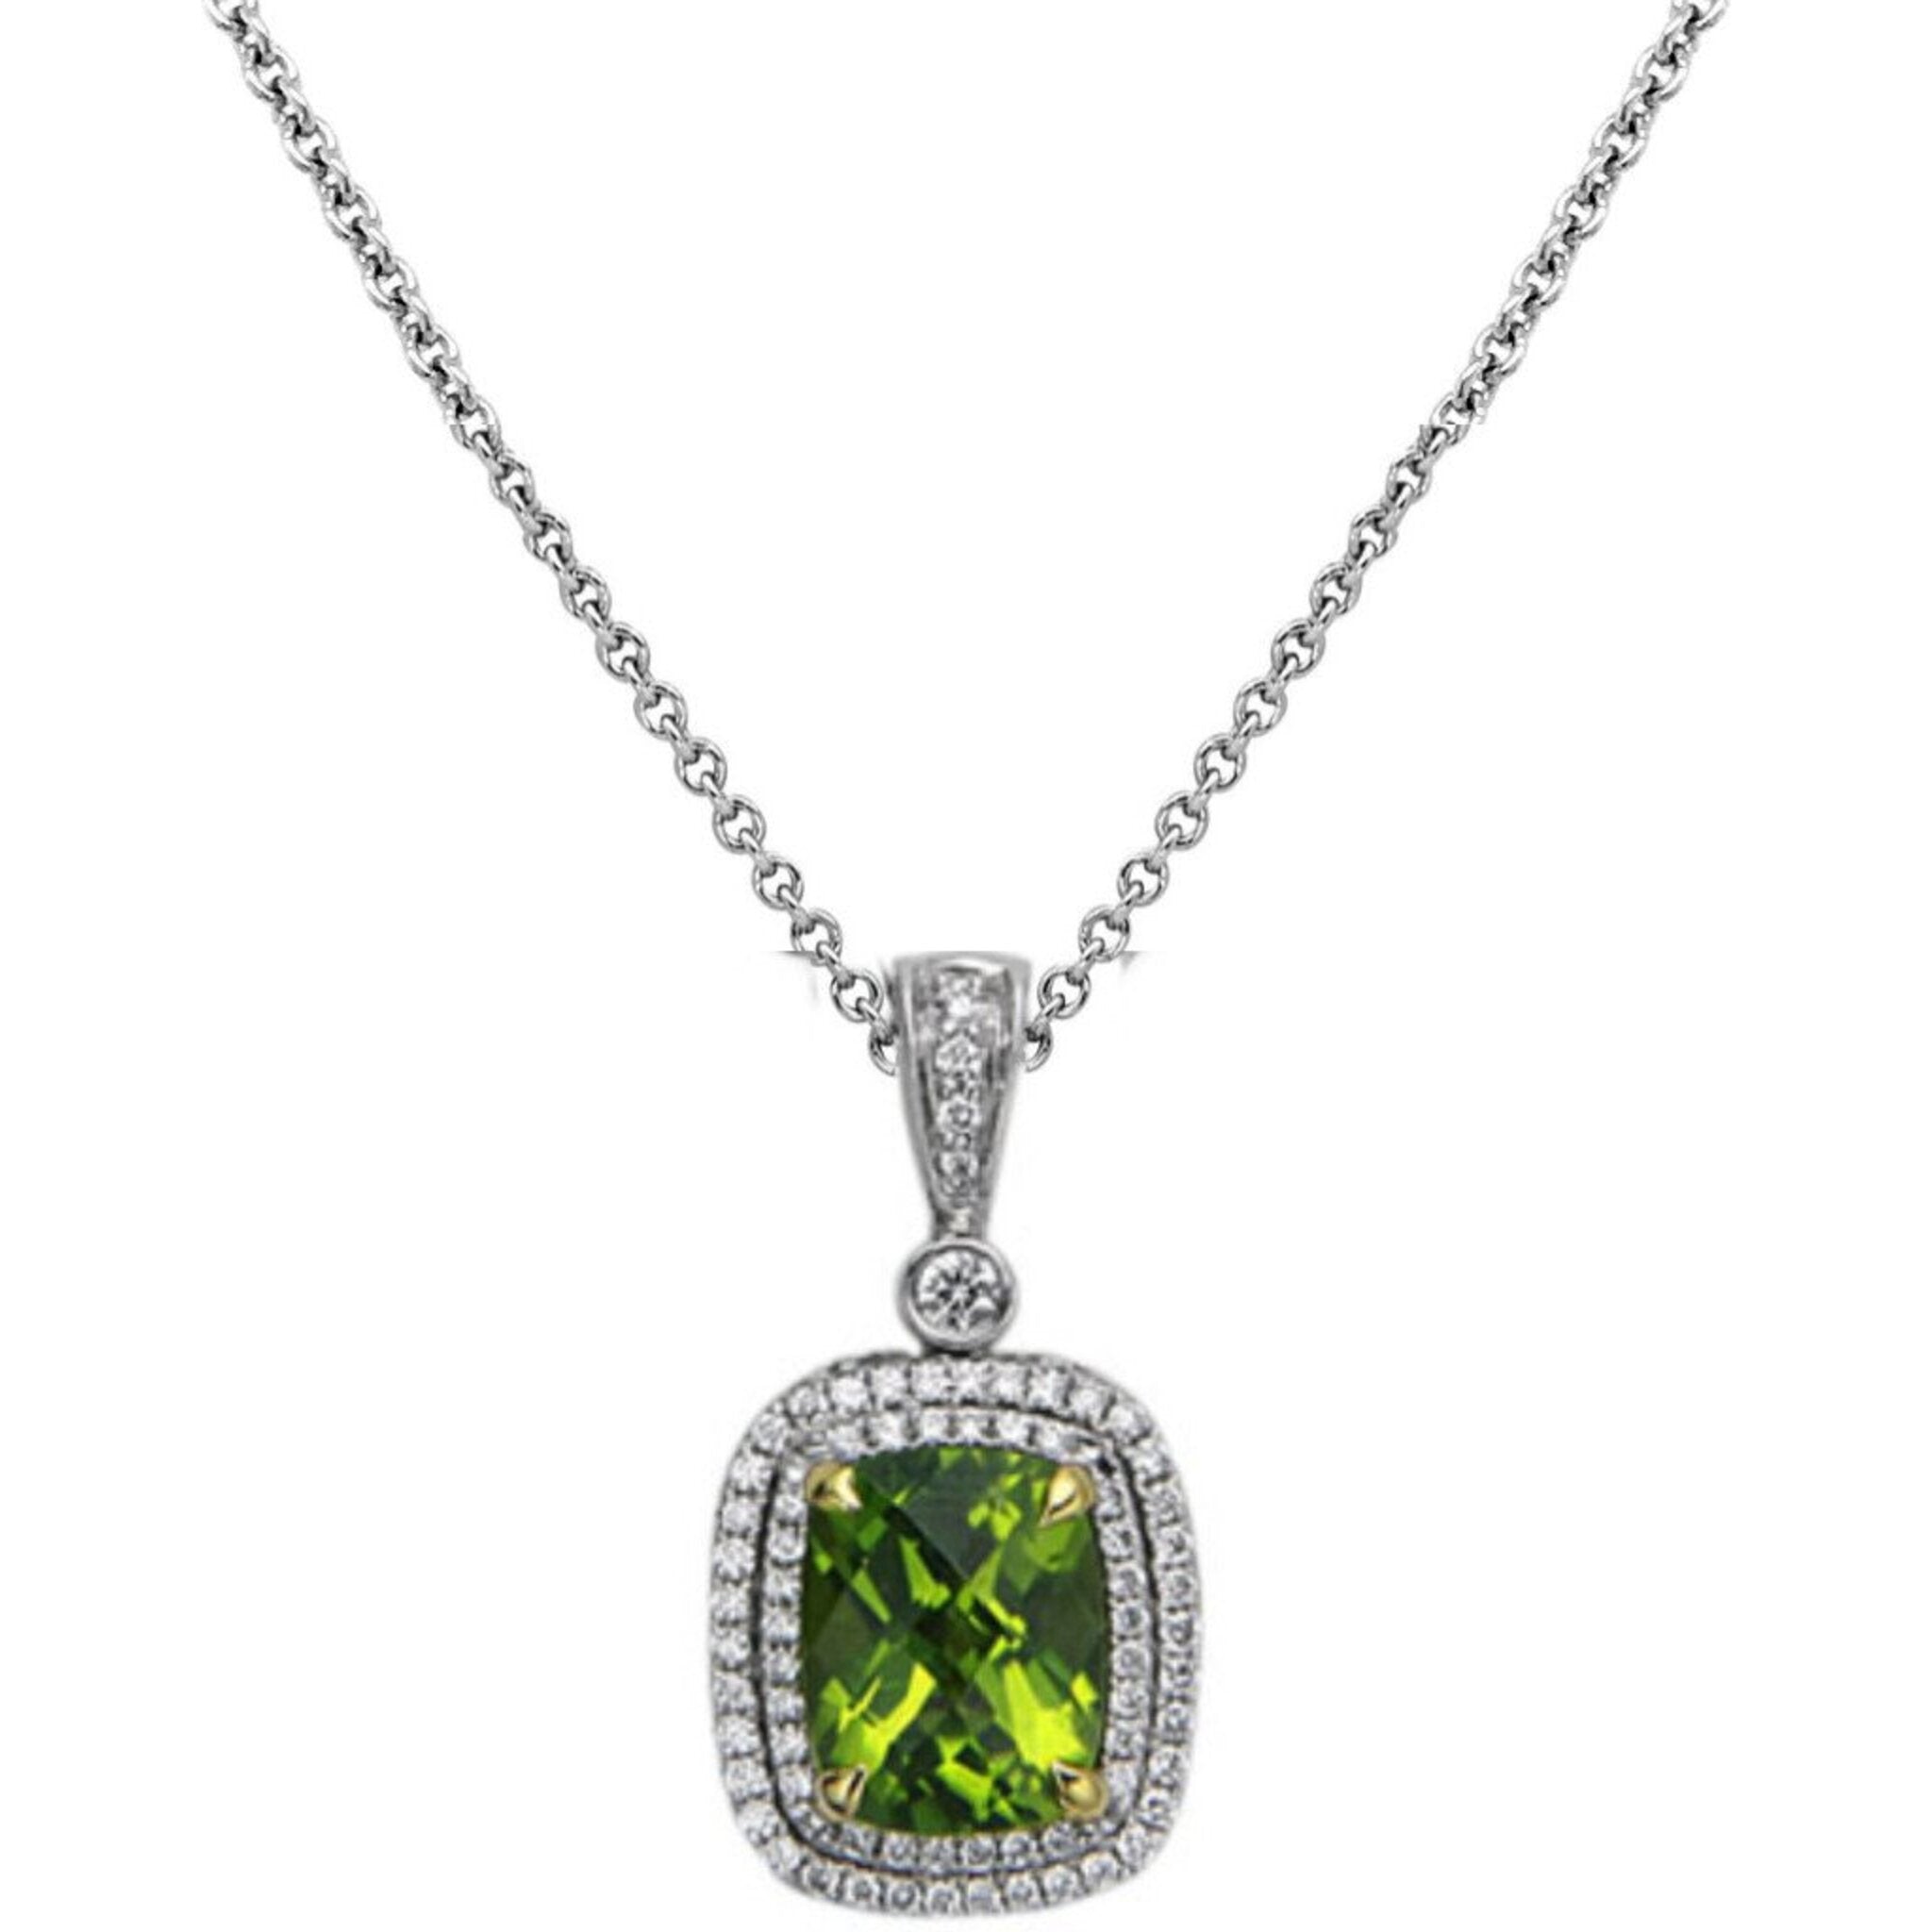 Charles Krypell - Pastel Diamond Double Halo Cushion Reversible Necklace - Peridot